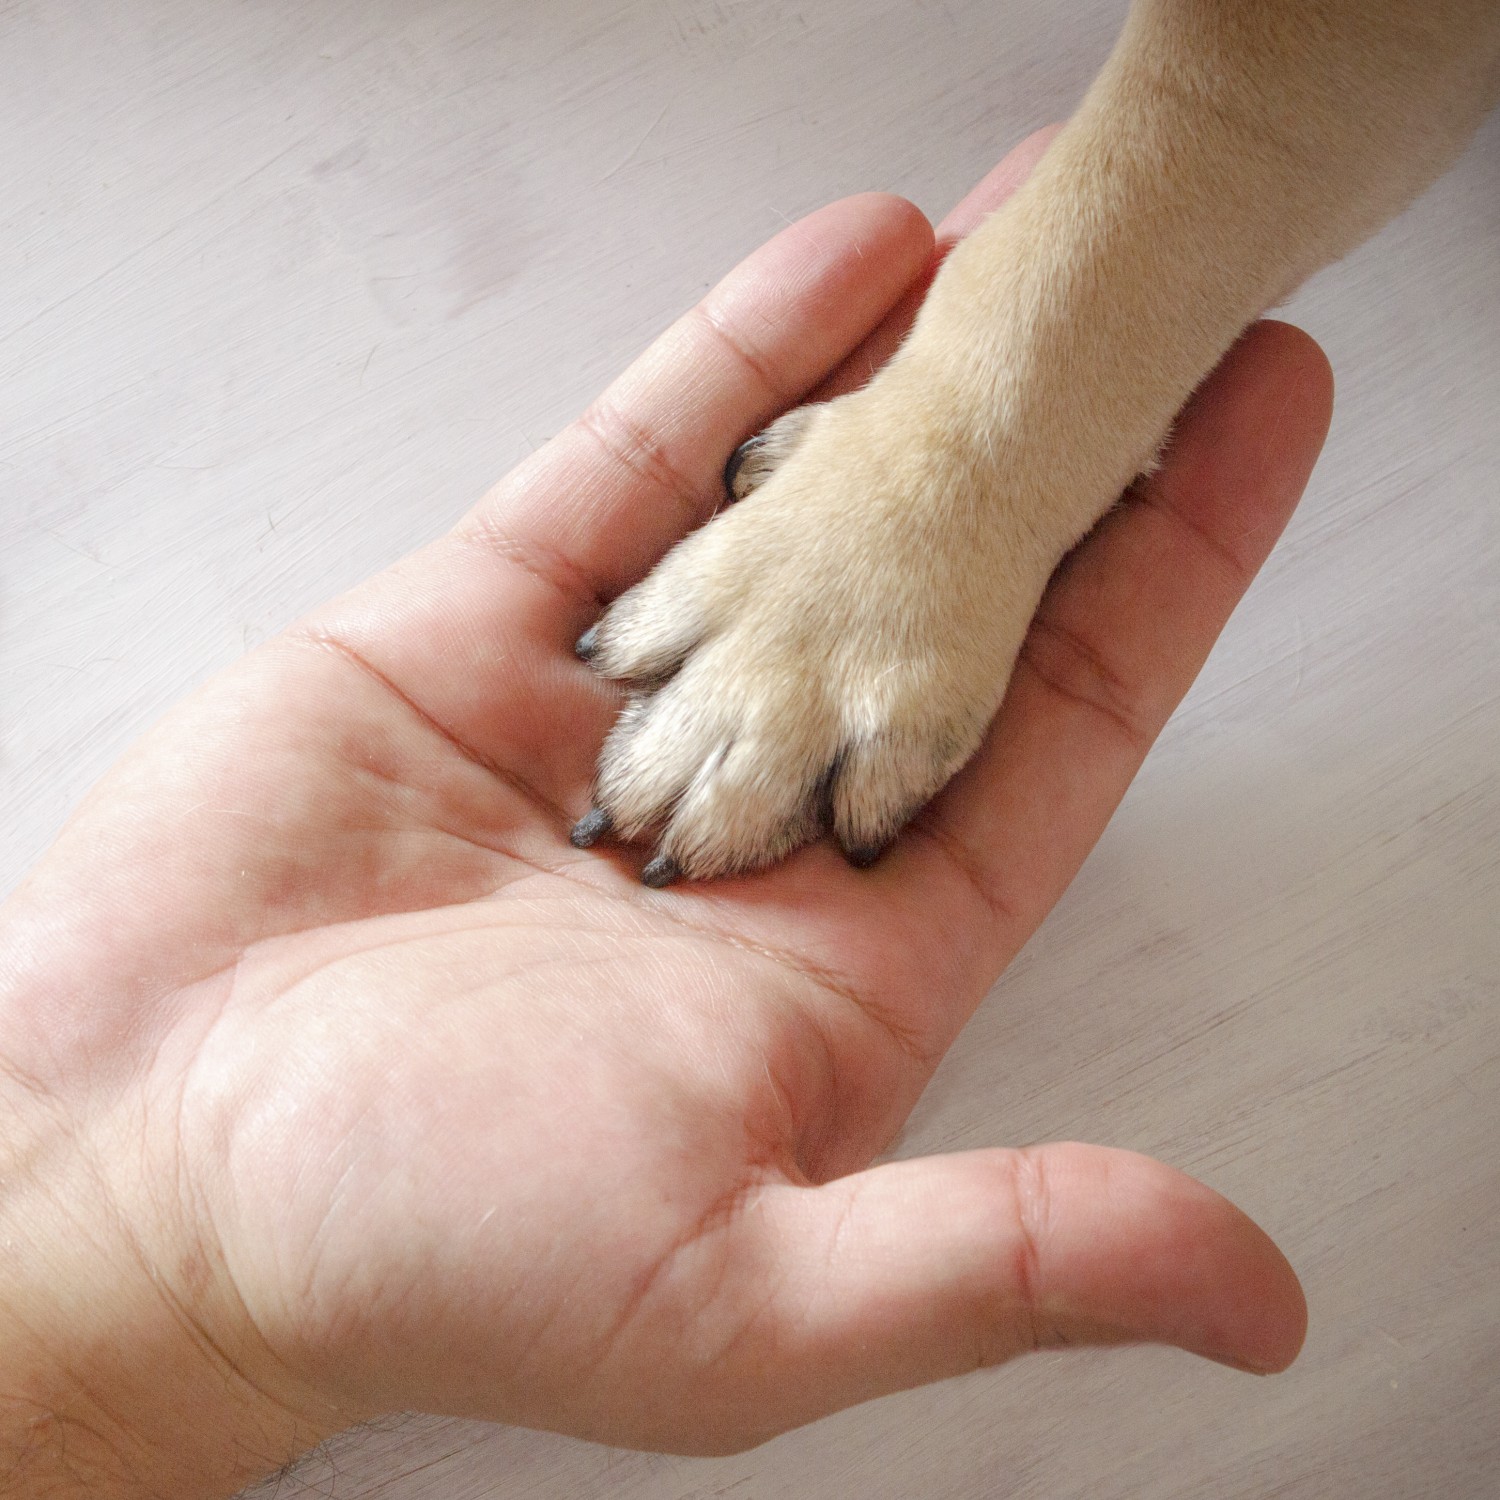 Dog Paw in Human Hand - Behavior Counseling